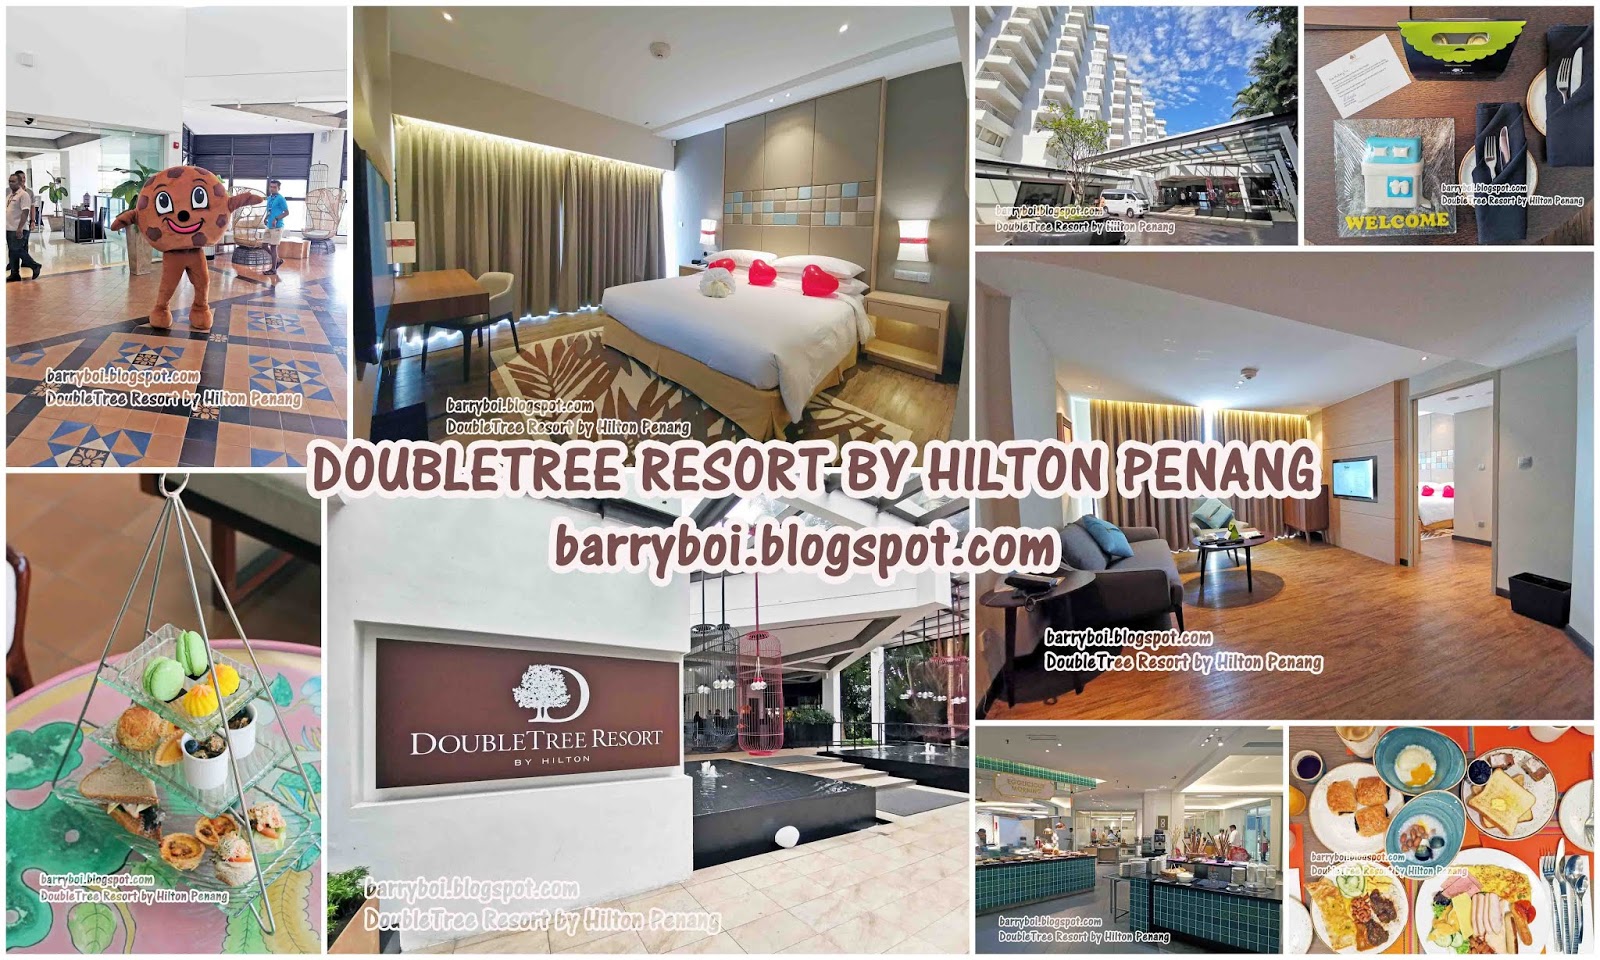 Double The Excitement At Doubletree Resort By Hilton Penang